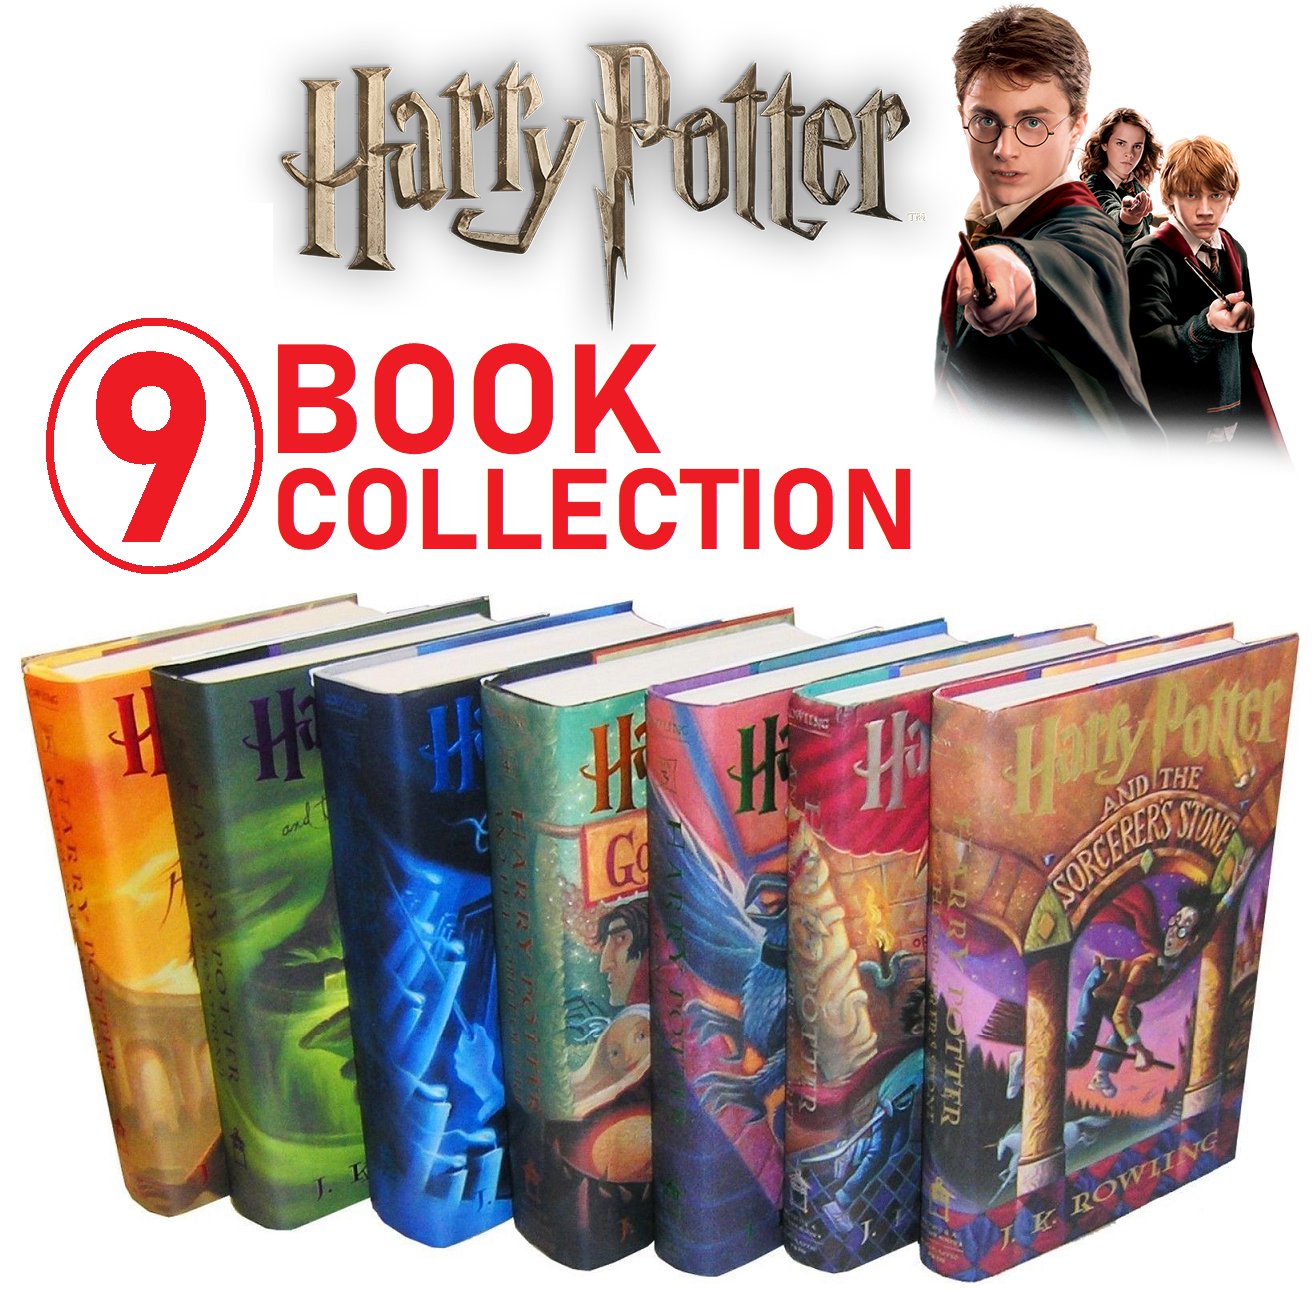 Harry Potter - 9 Book Complete Collection 1-7 Ebook Series + 2 Bonuses